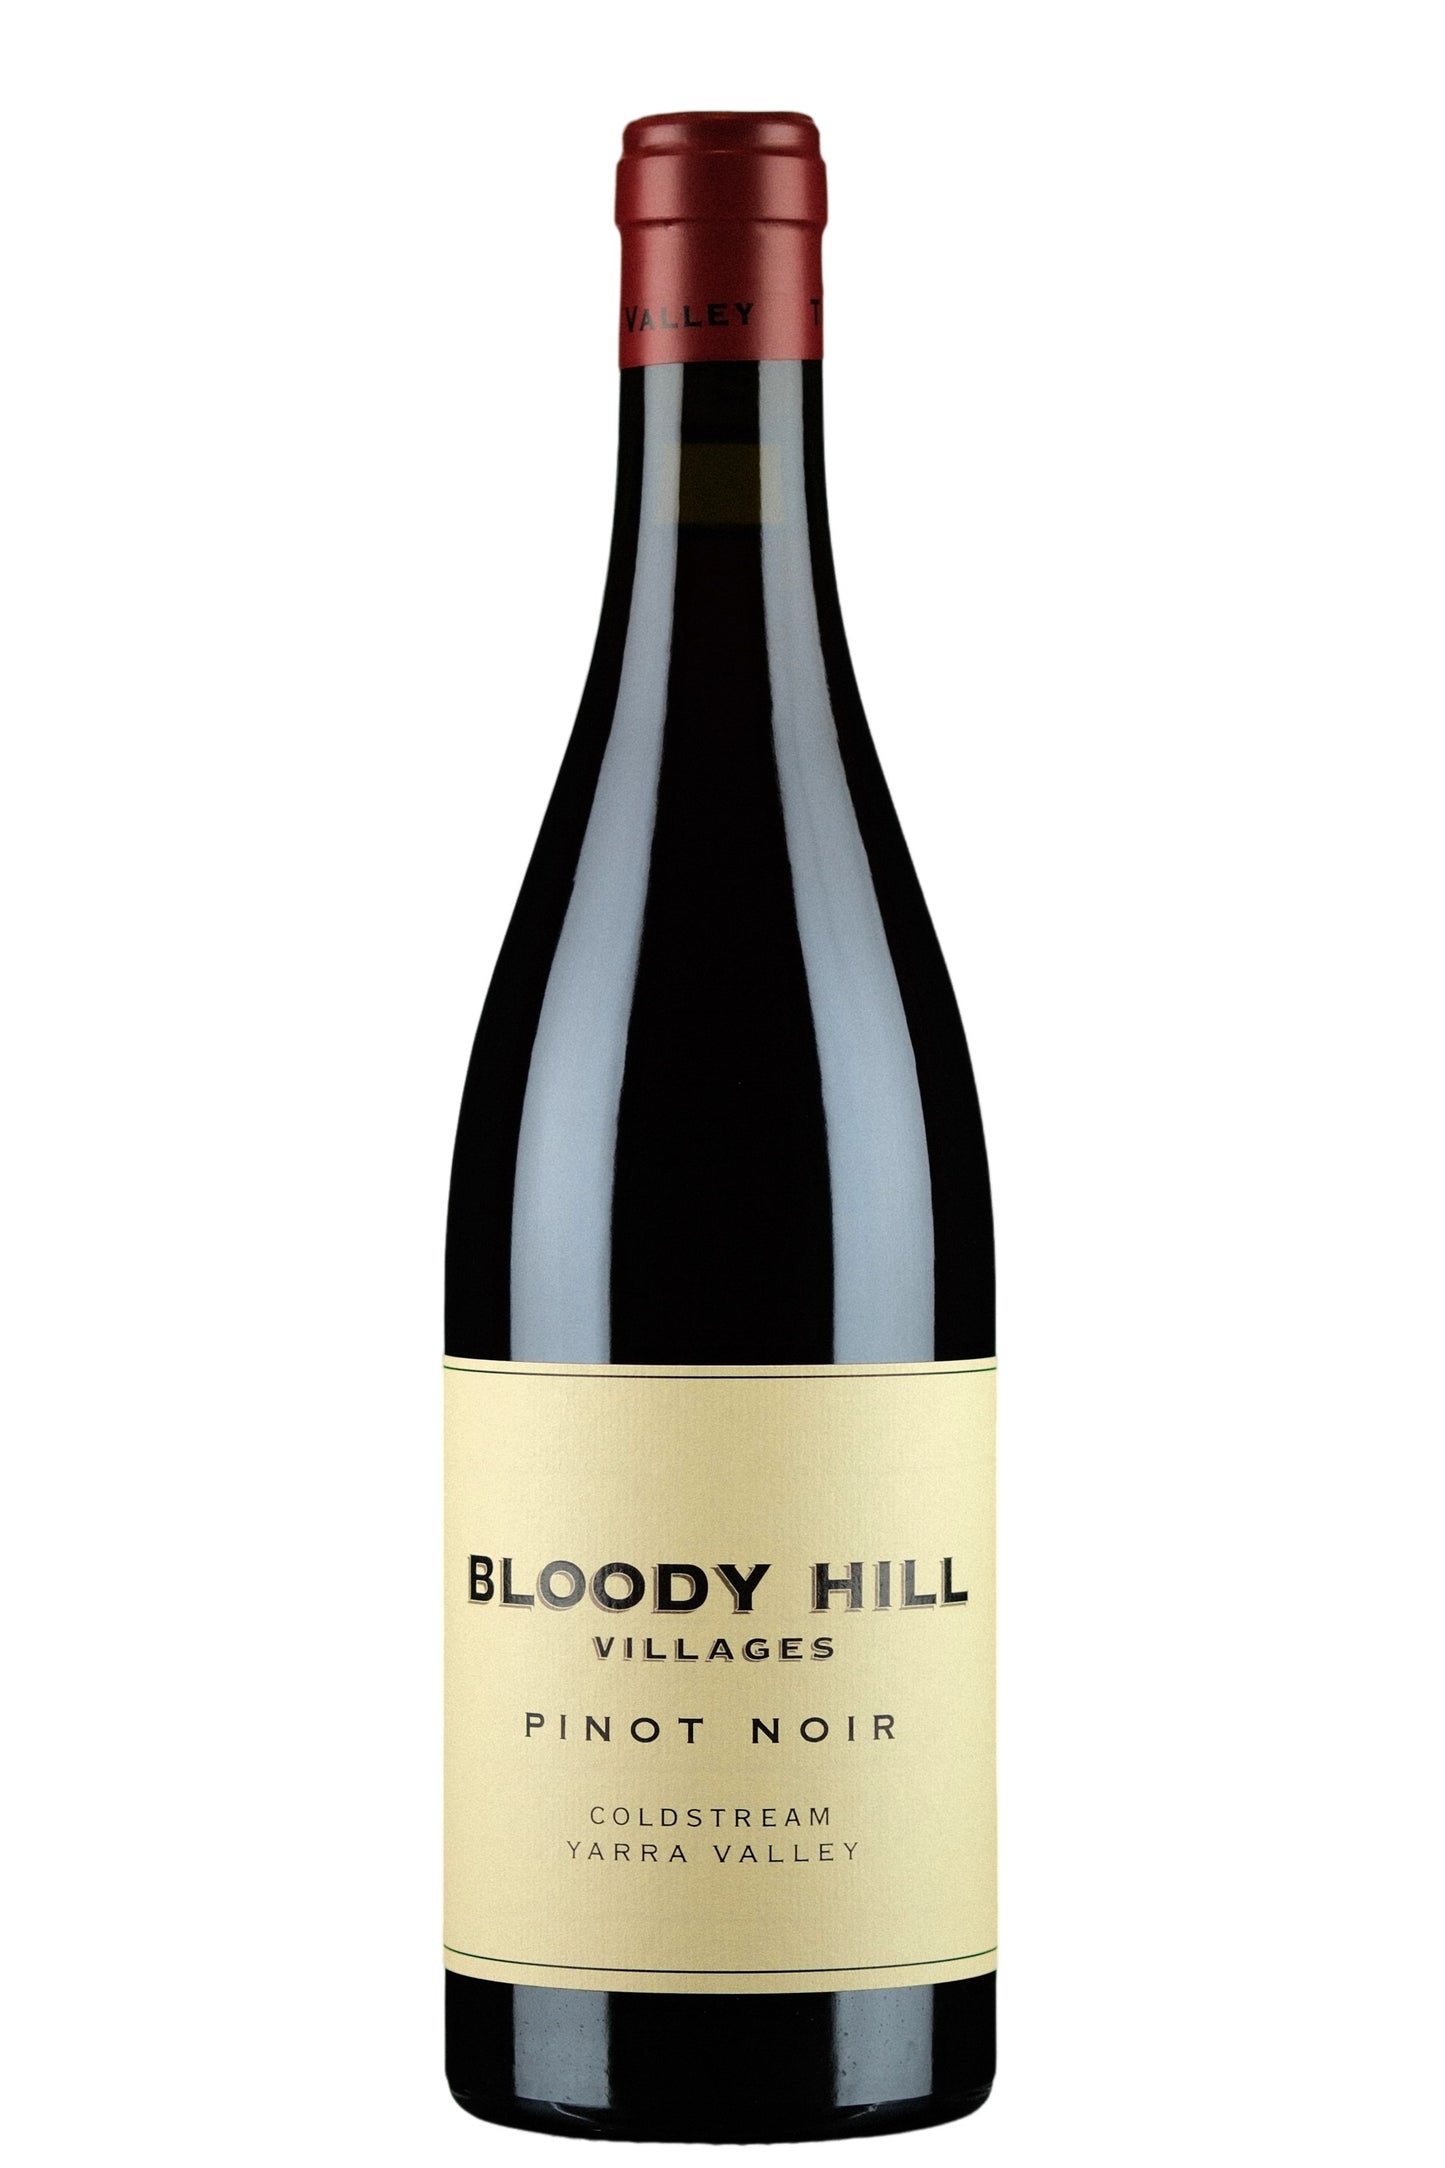 Bloody Hill Villages Coldstream Pinot Noir